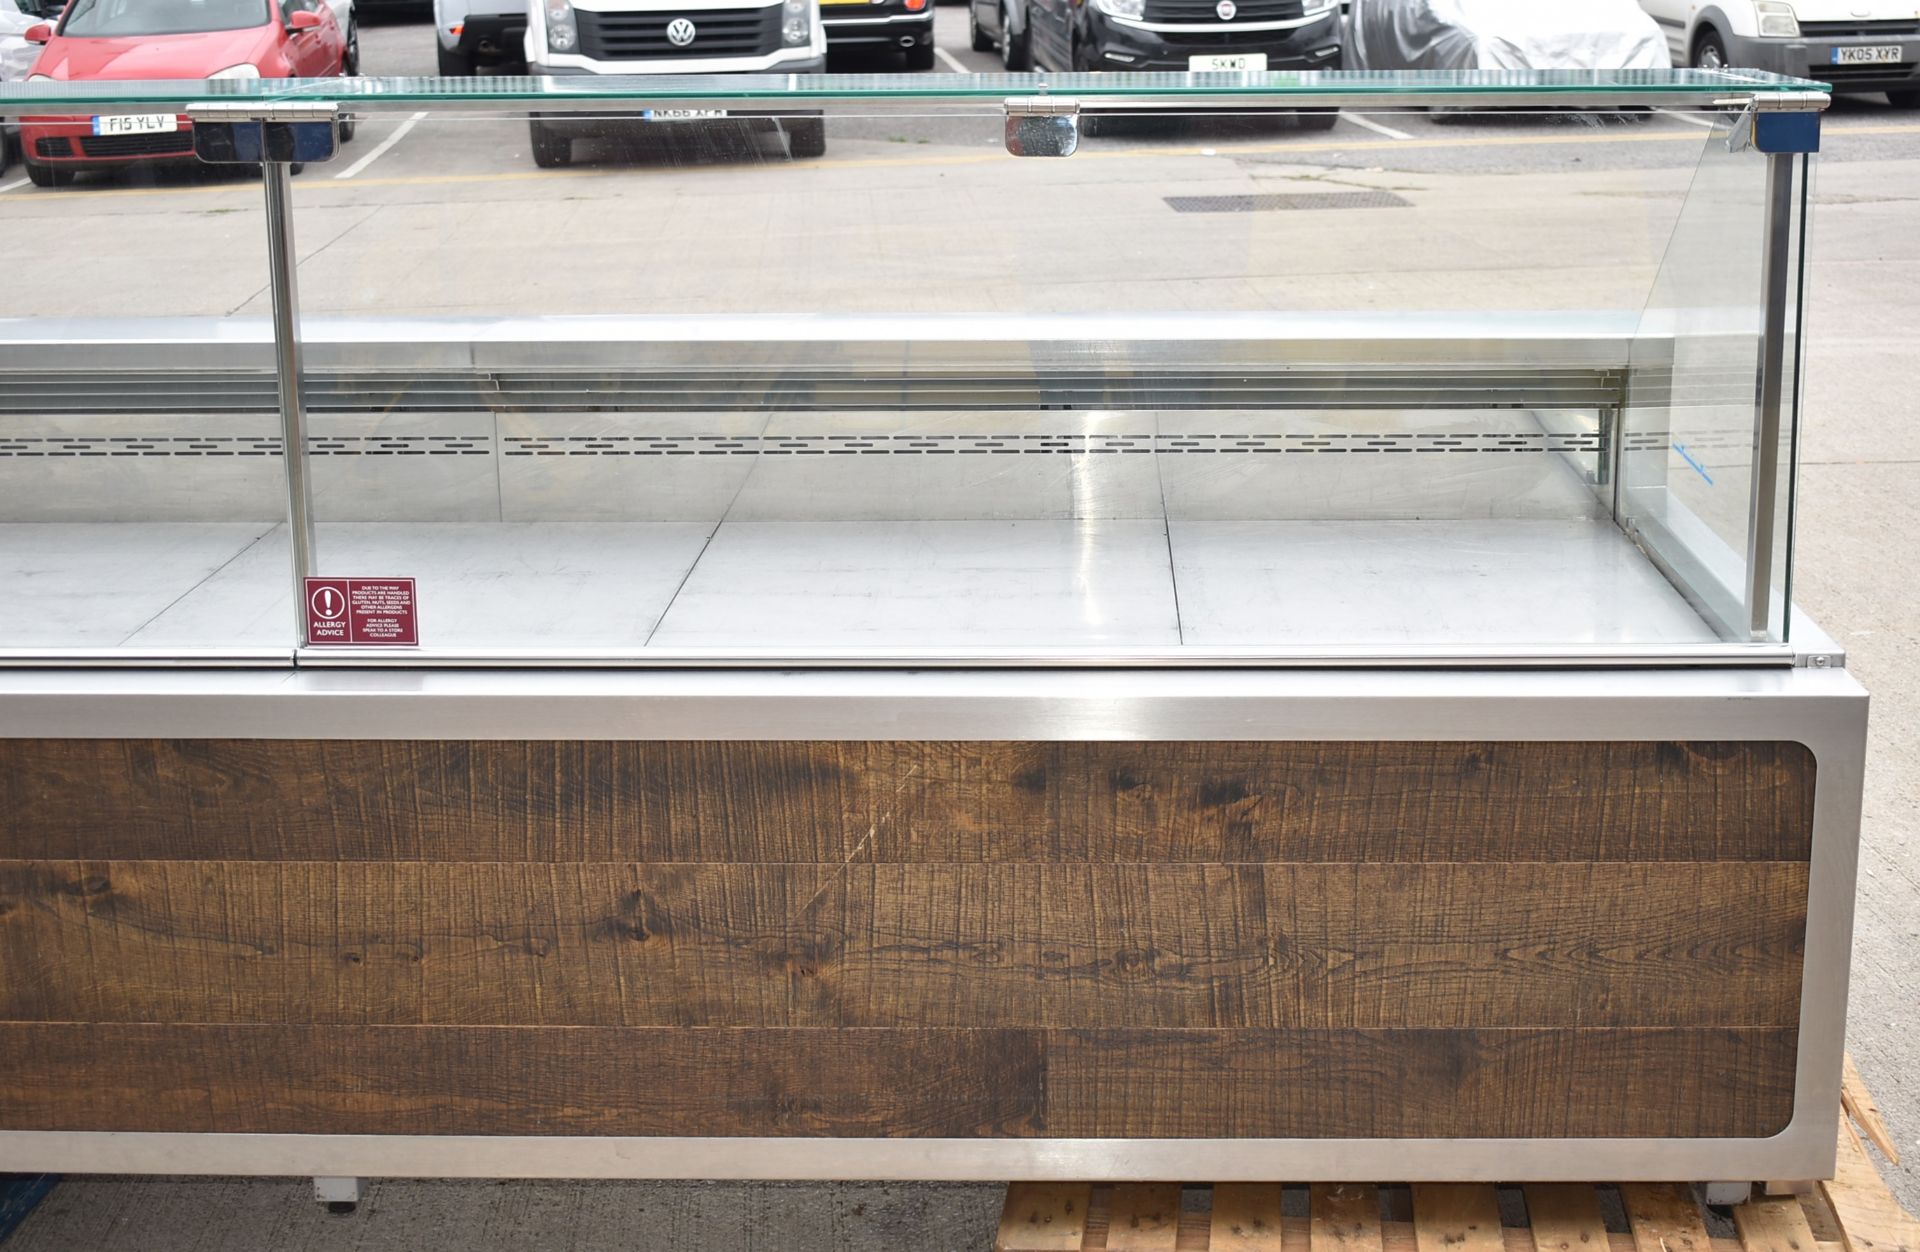 1 x Eurocryor Bistro Refrigerated Retail Counter - Suitable For Takeaways, Butchers, Deli, Cake - Image 8 of 28